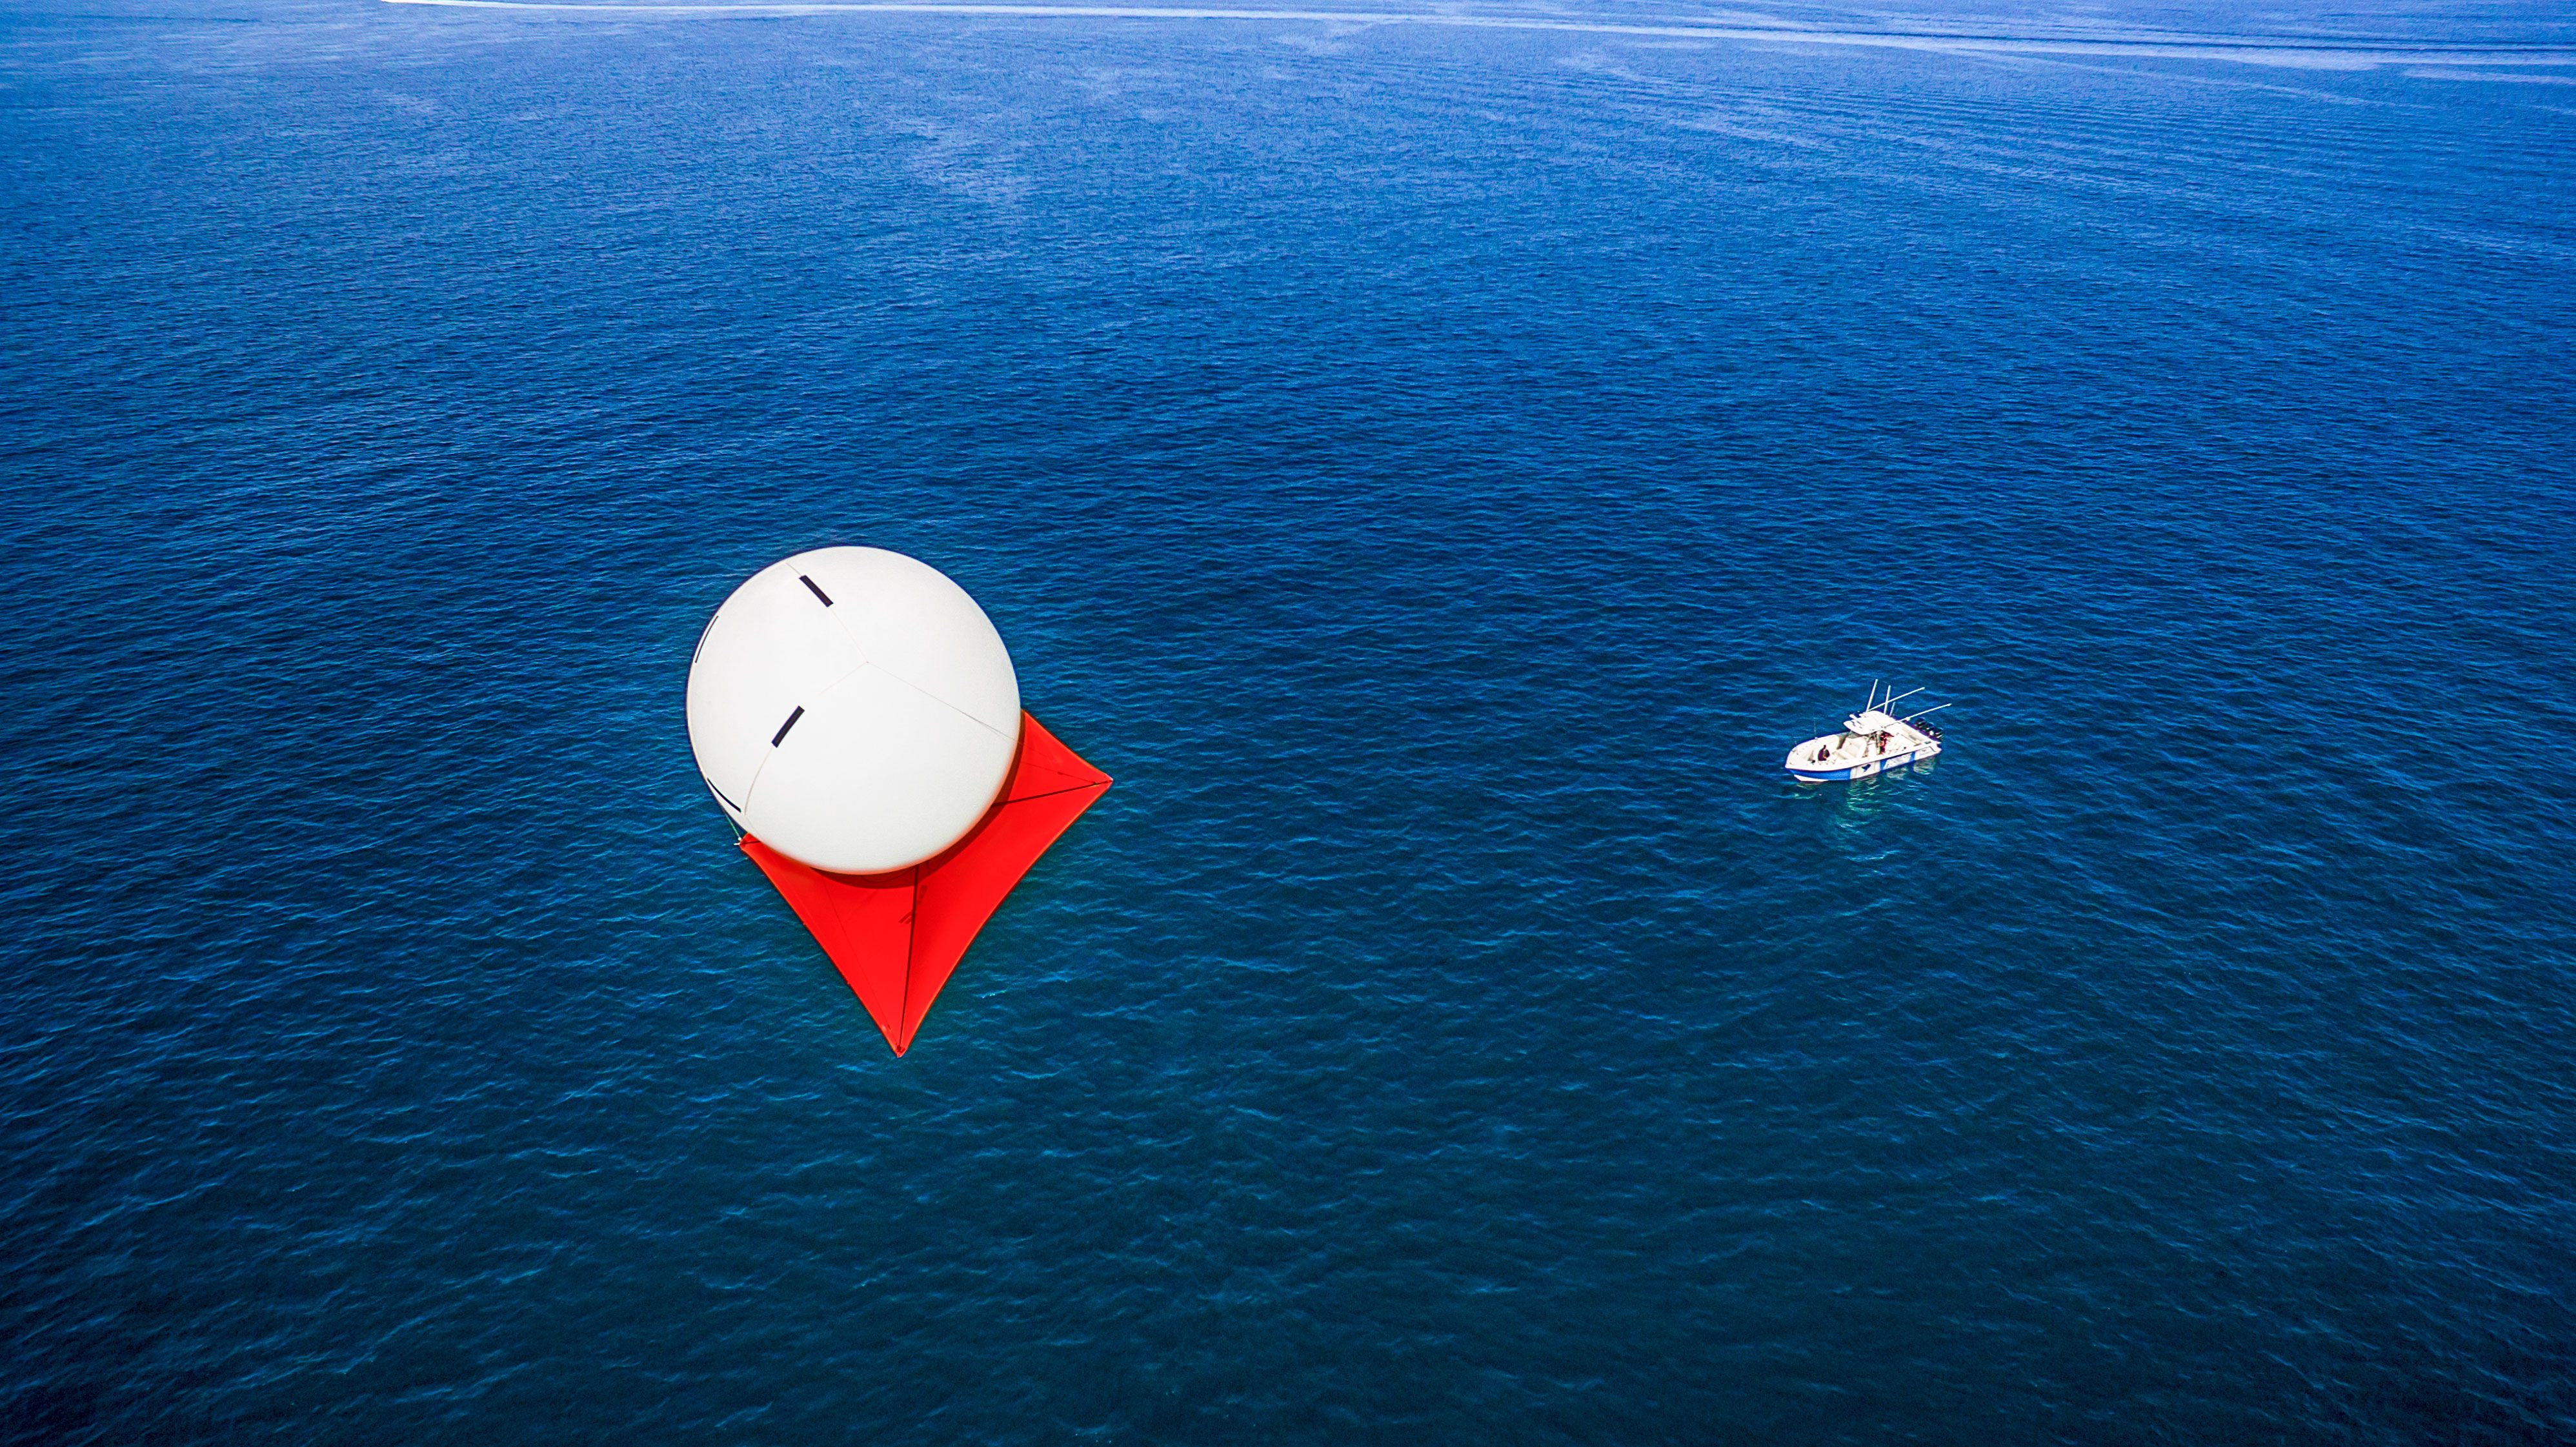 The Future of Fishing Is Kites?